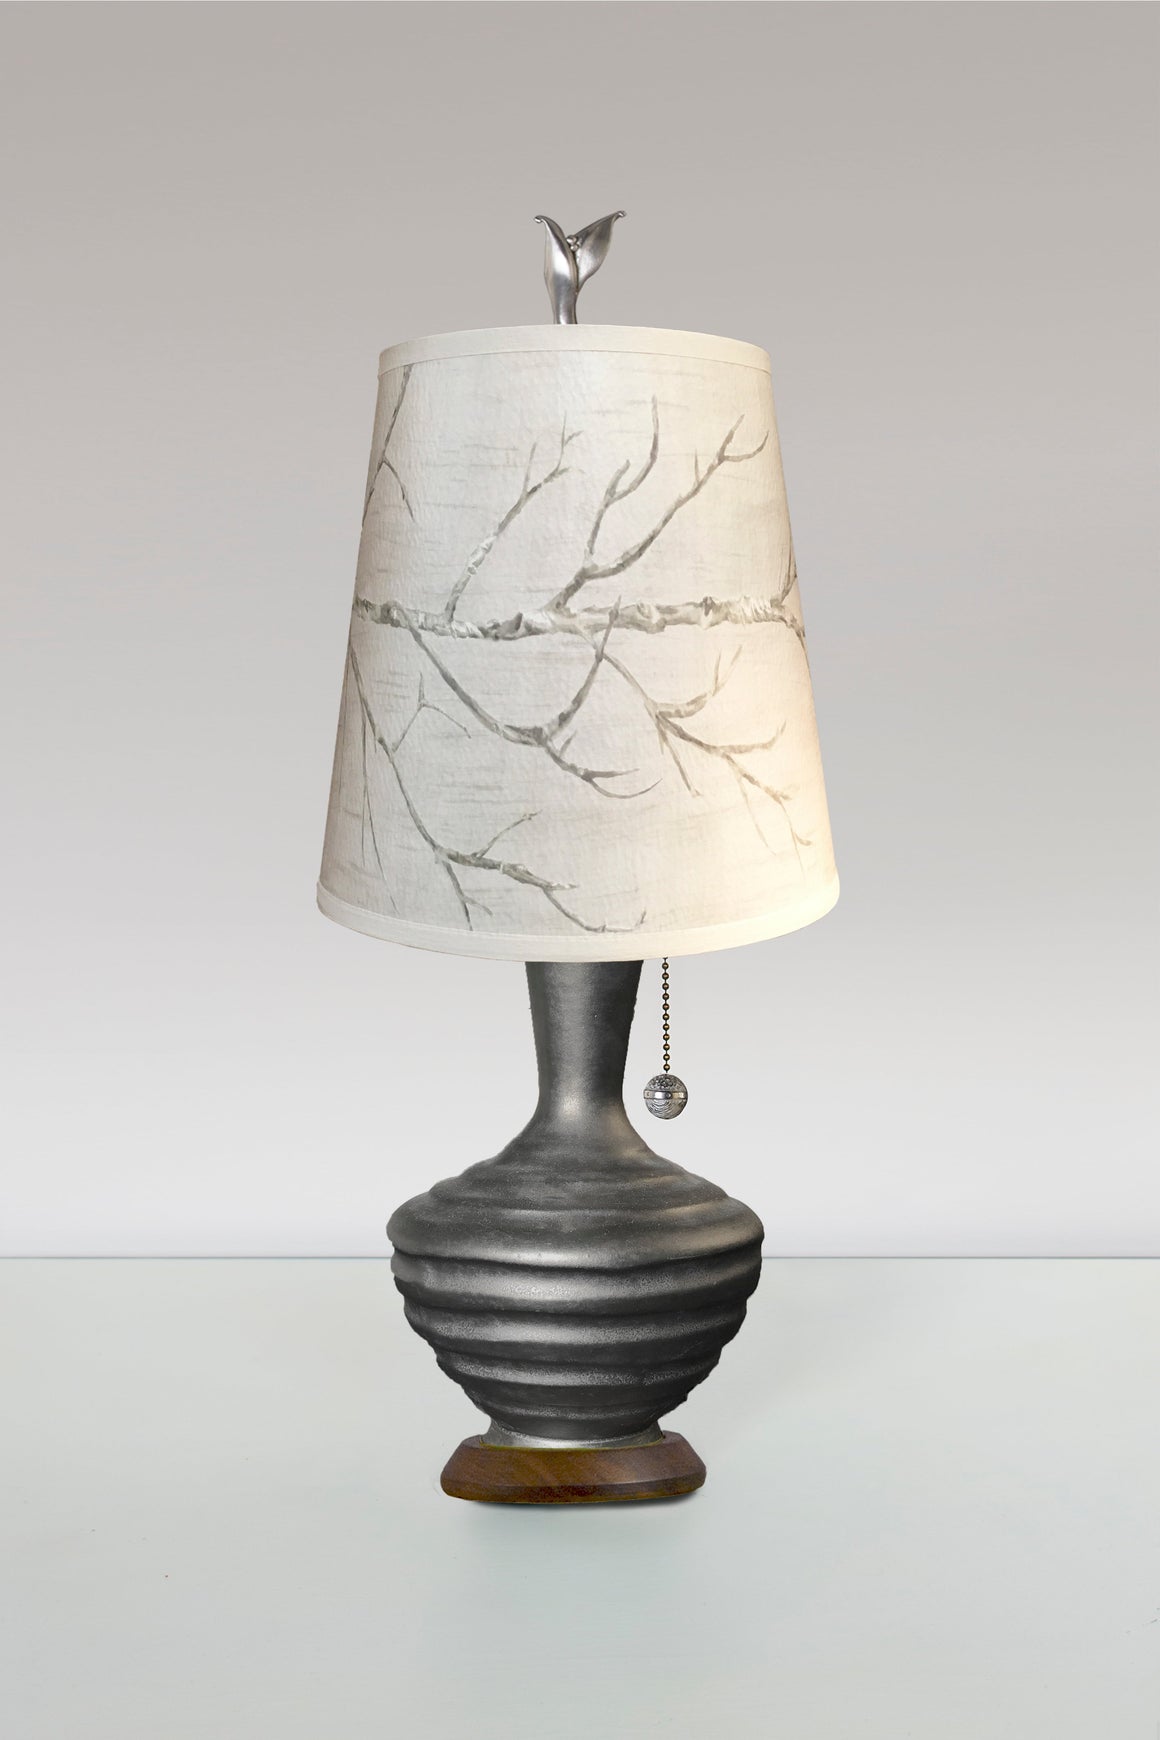 Ceramic Table Lamp with Small Drum Shade in Sweeping Branch